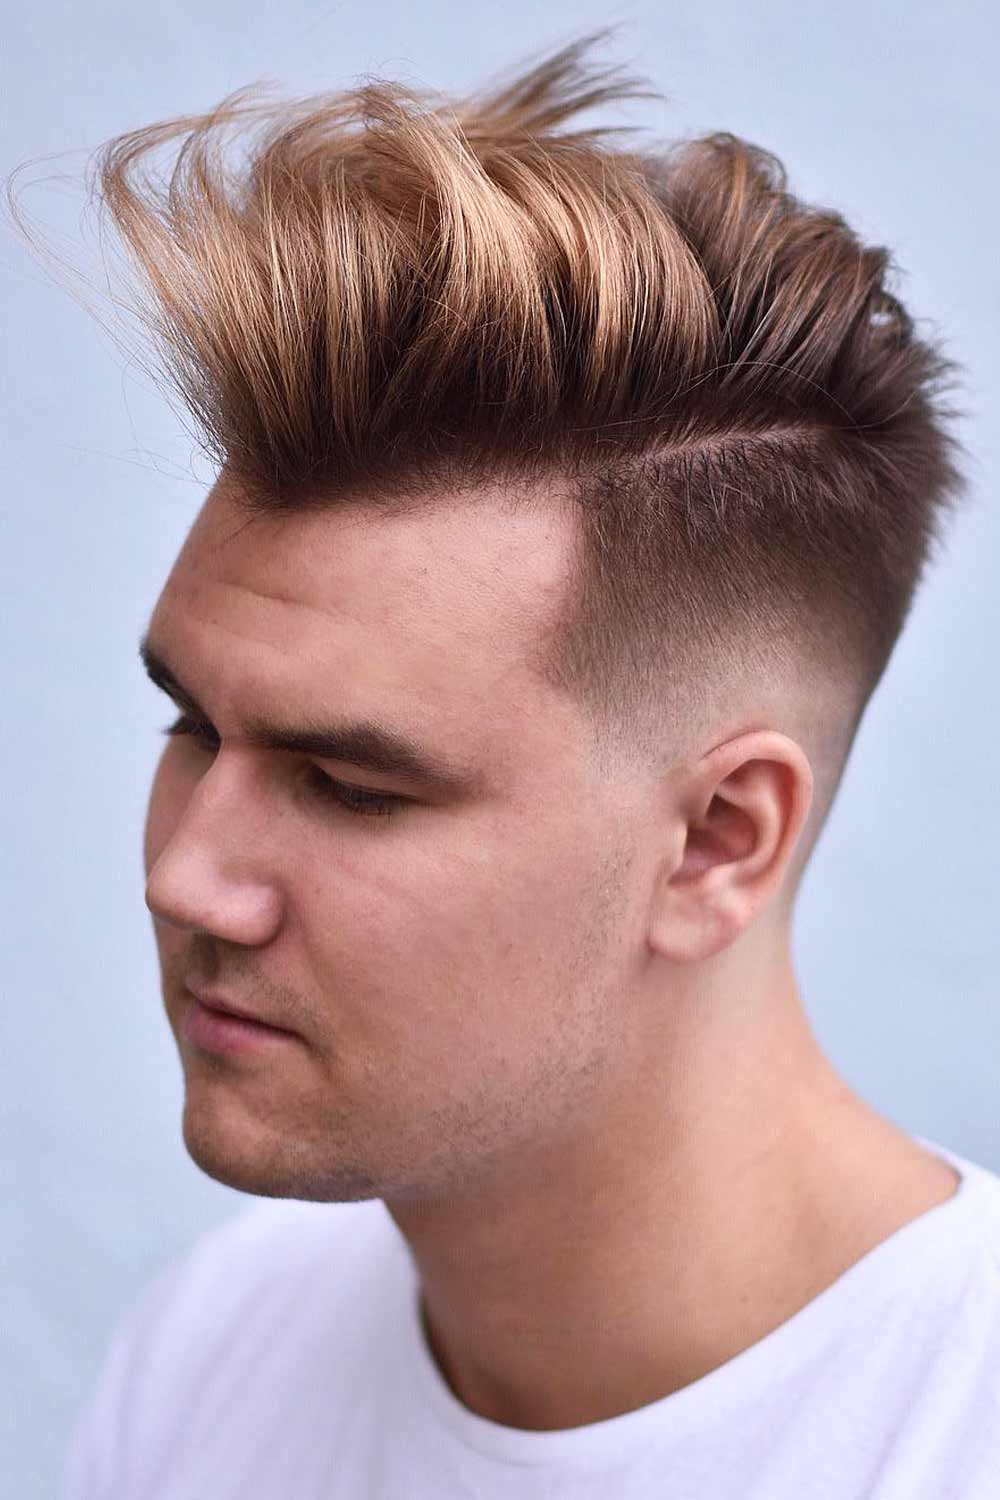 70 Stylish Undercut Hairstyle Variations to copy in 2023: A Complete Guide  | Mens hairstyles undercut, Cool hairstyles for men, Undercut hairstyles